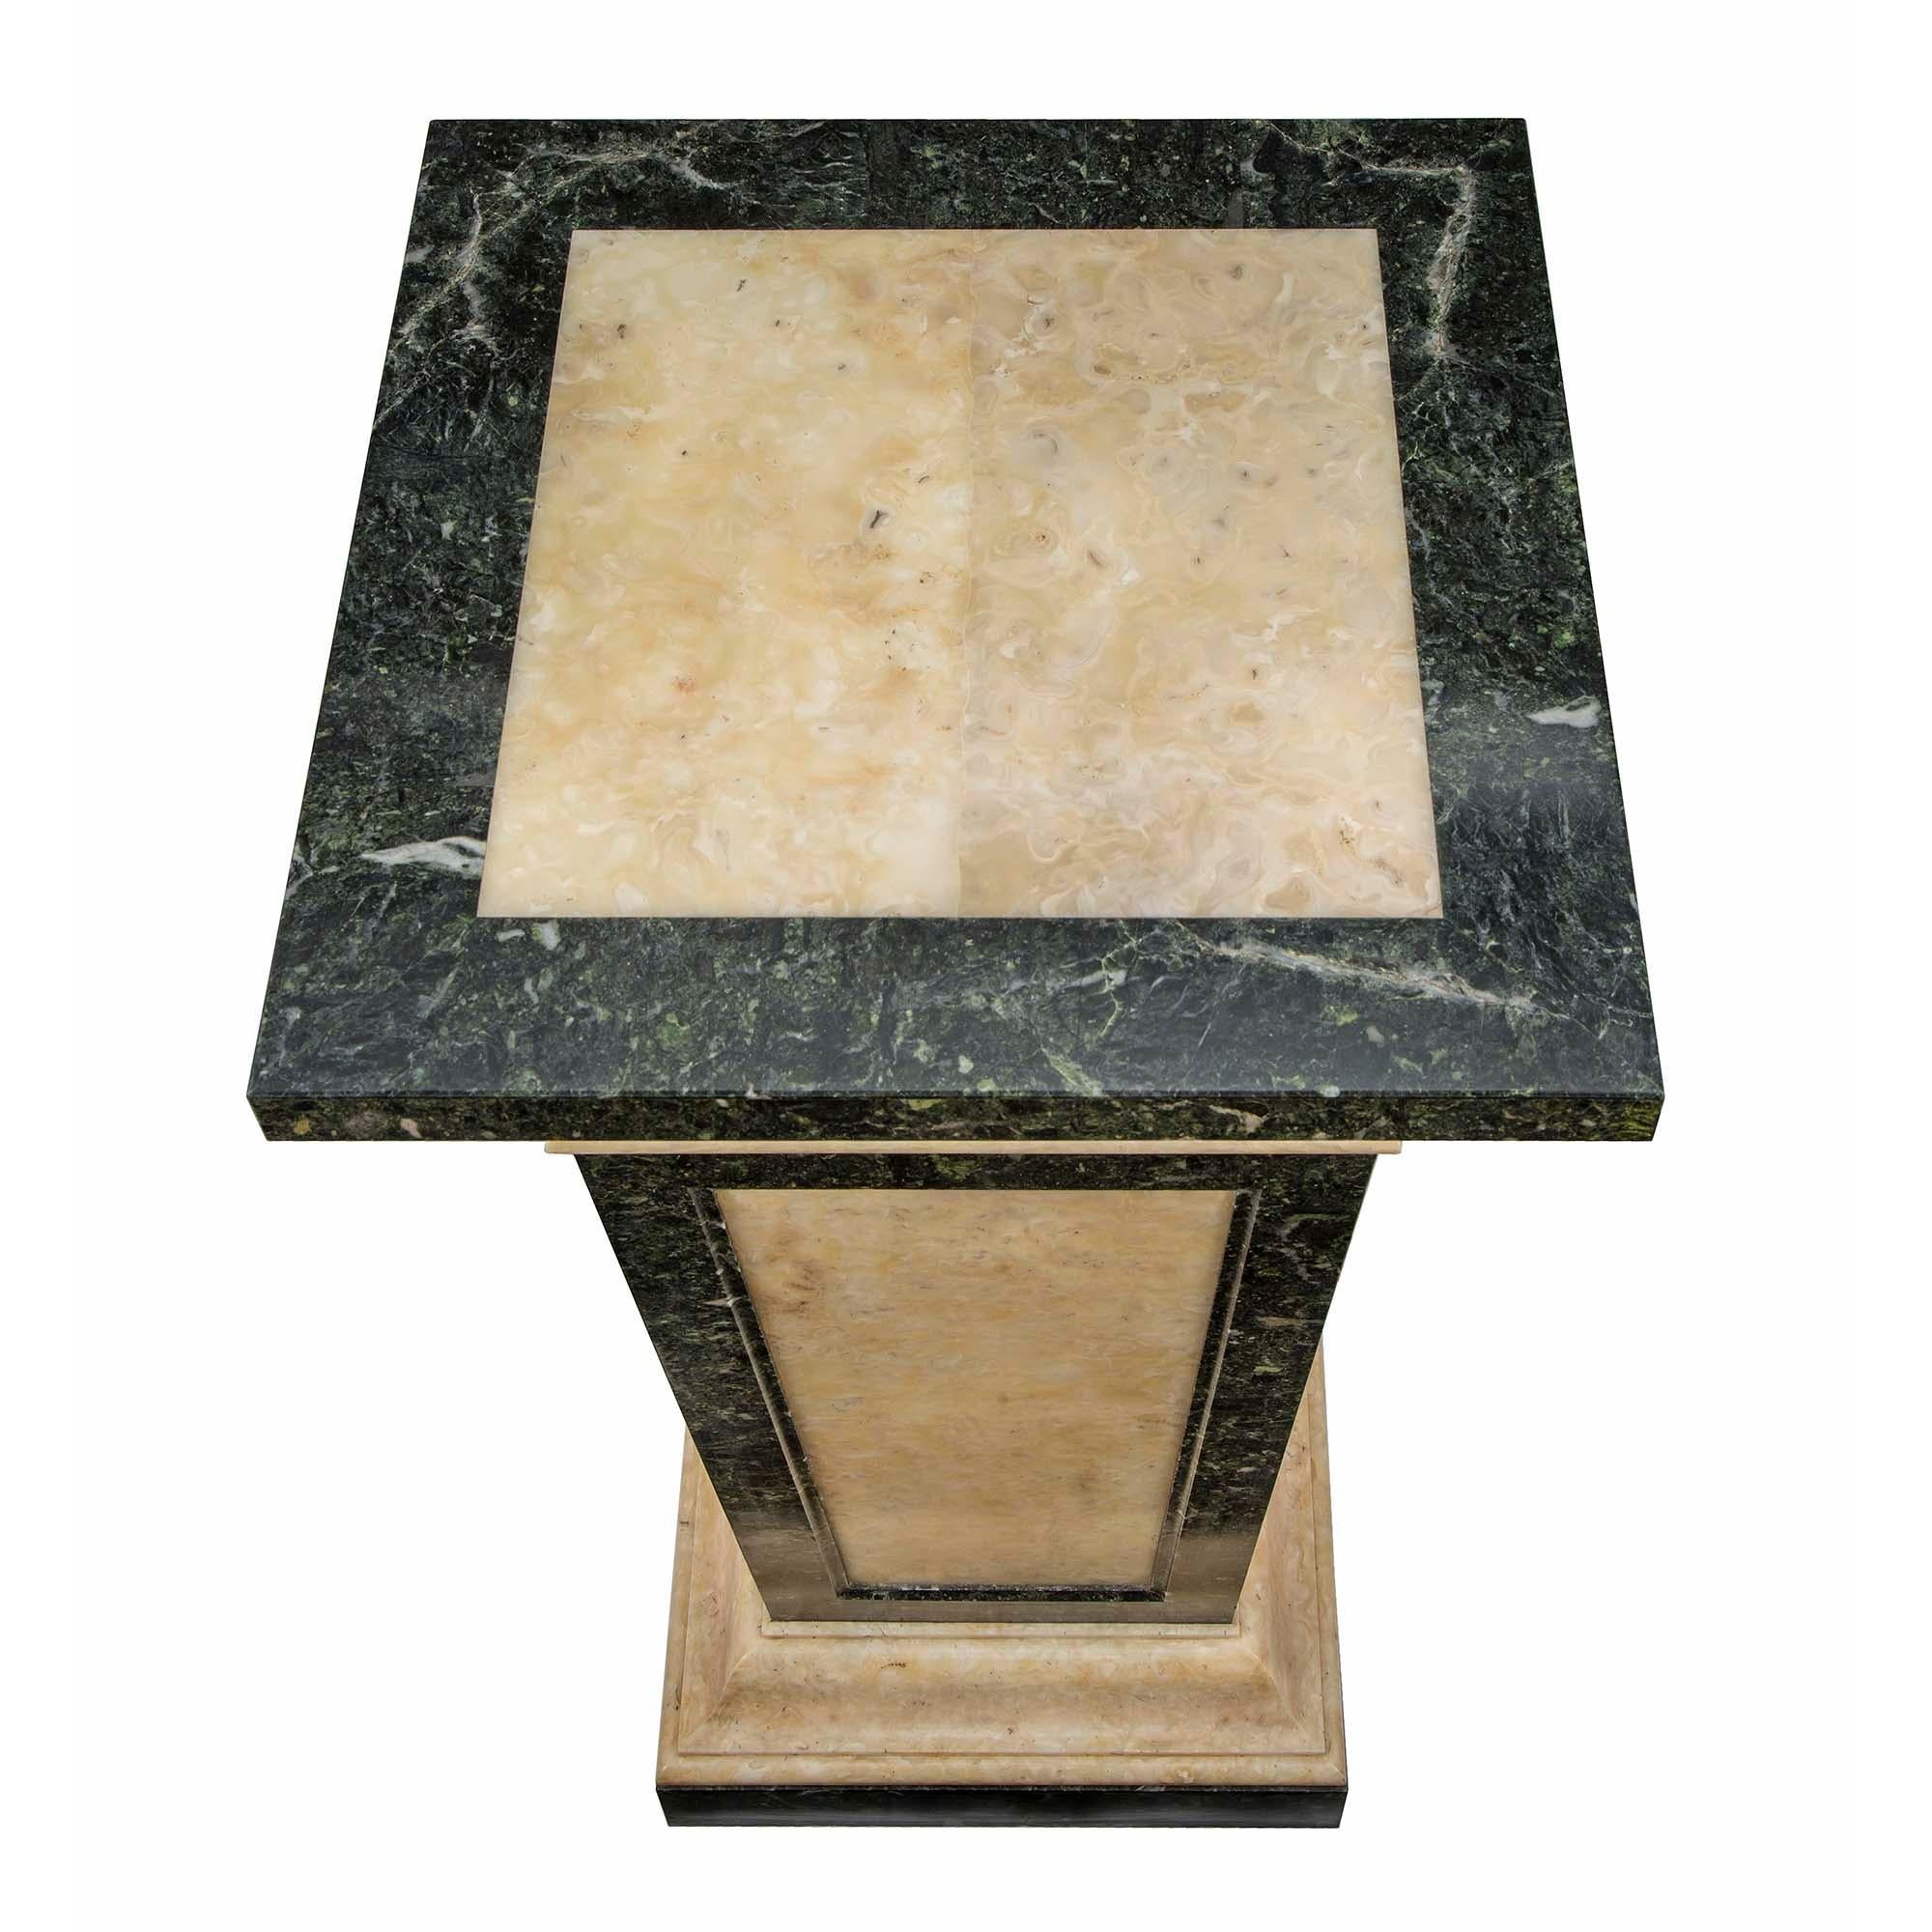 A very handsome Italian late 19th century neo-classical st. alabaster and marble pedestal. The pedestal is raised on a Vert de Patricia square support with moulded stepped alabaster base. The tapered marble column is centered with fitted alabaster